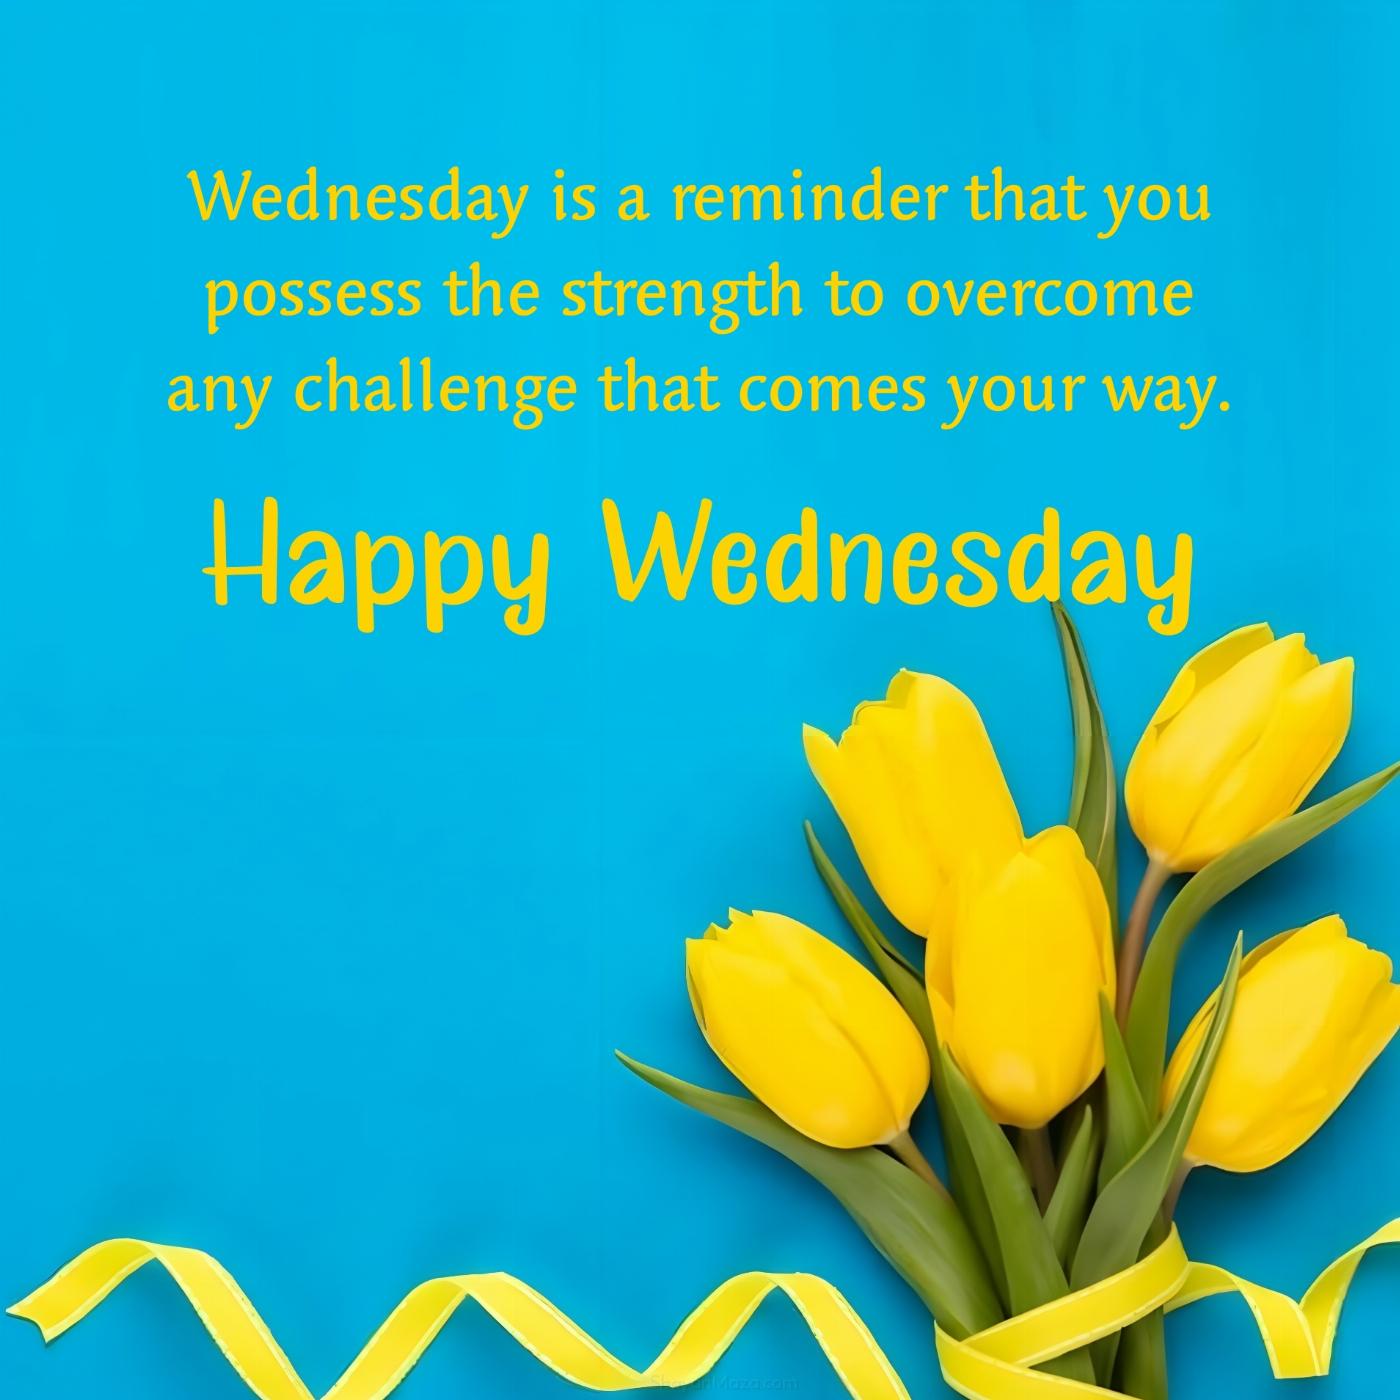 Wednesday is a reminder that you possess the strength to overcome any challenge